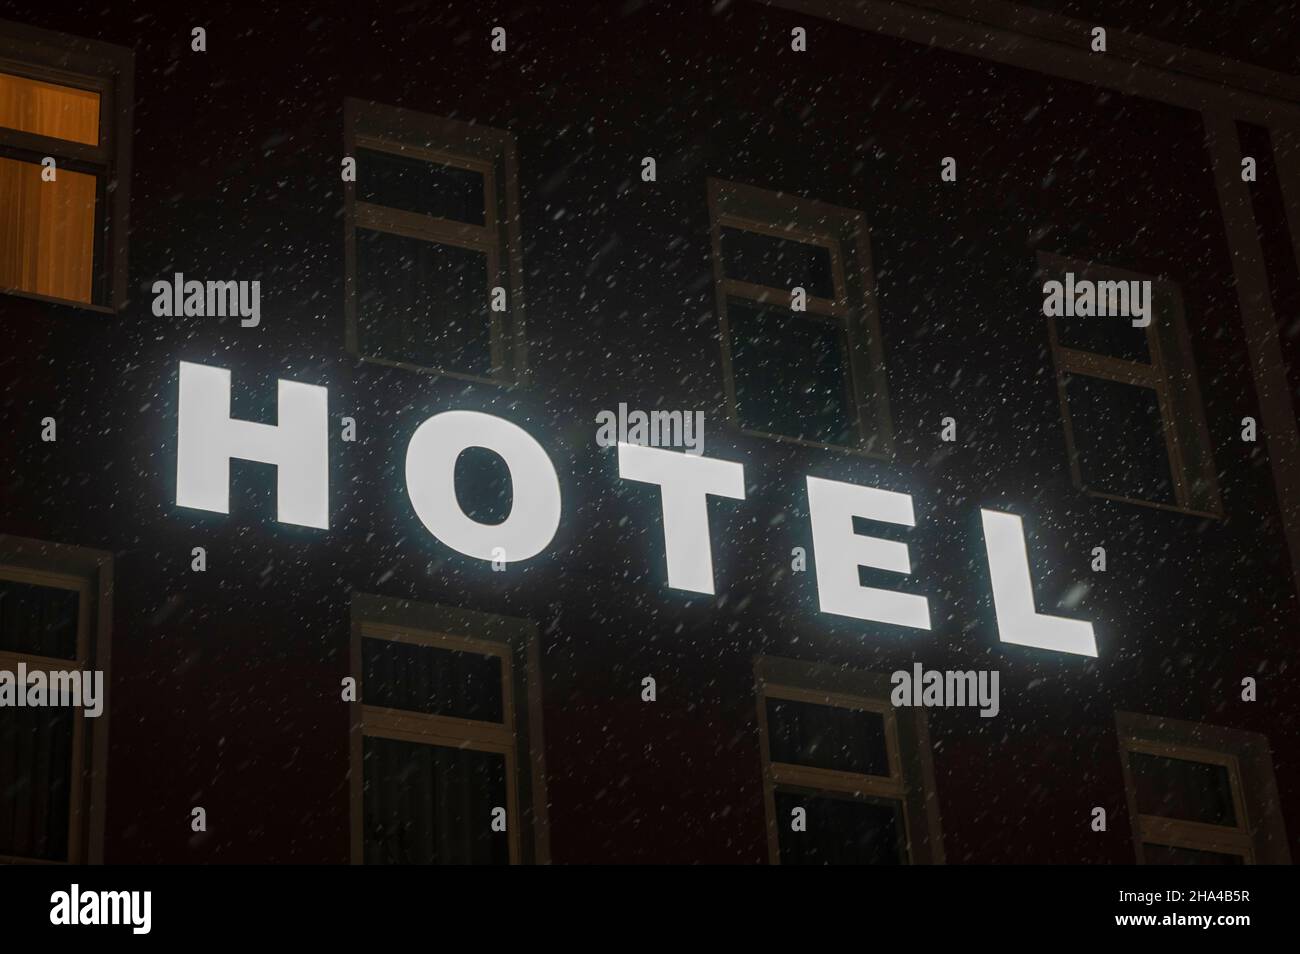 Writing hotel on a house wall during snowfall Stock Photo